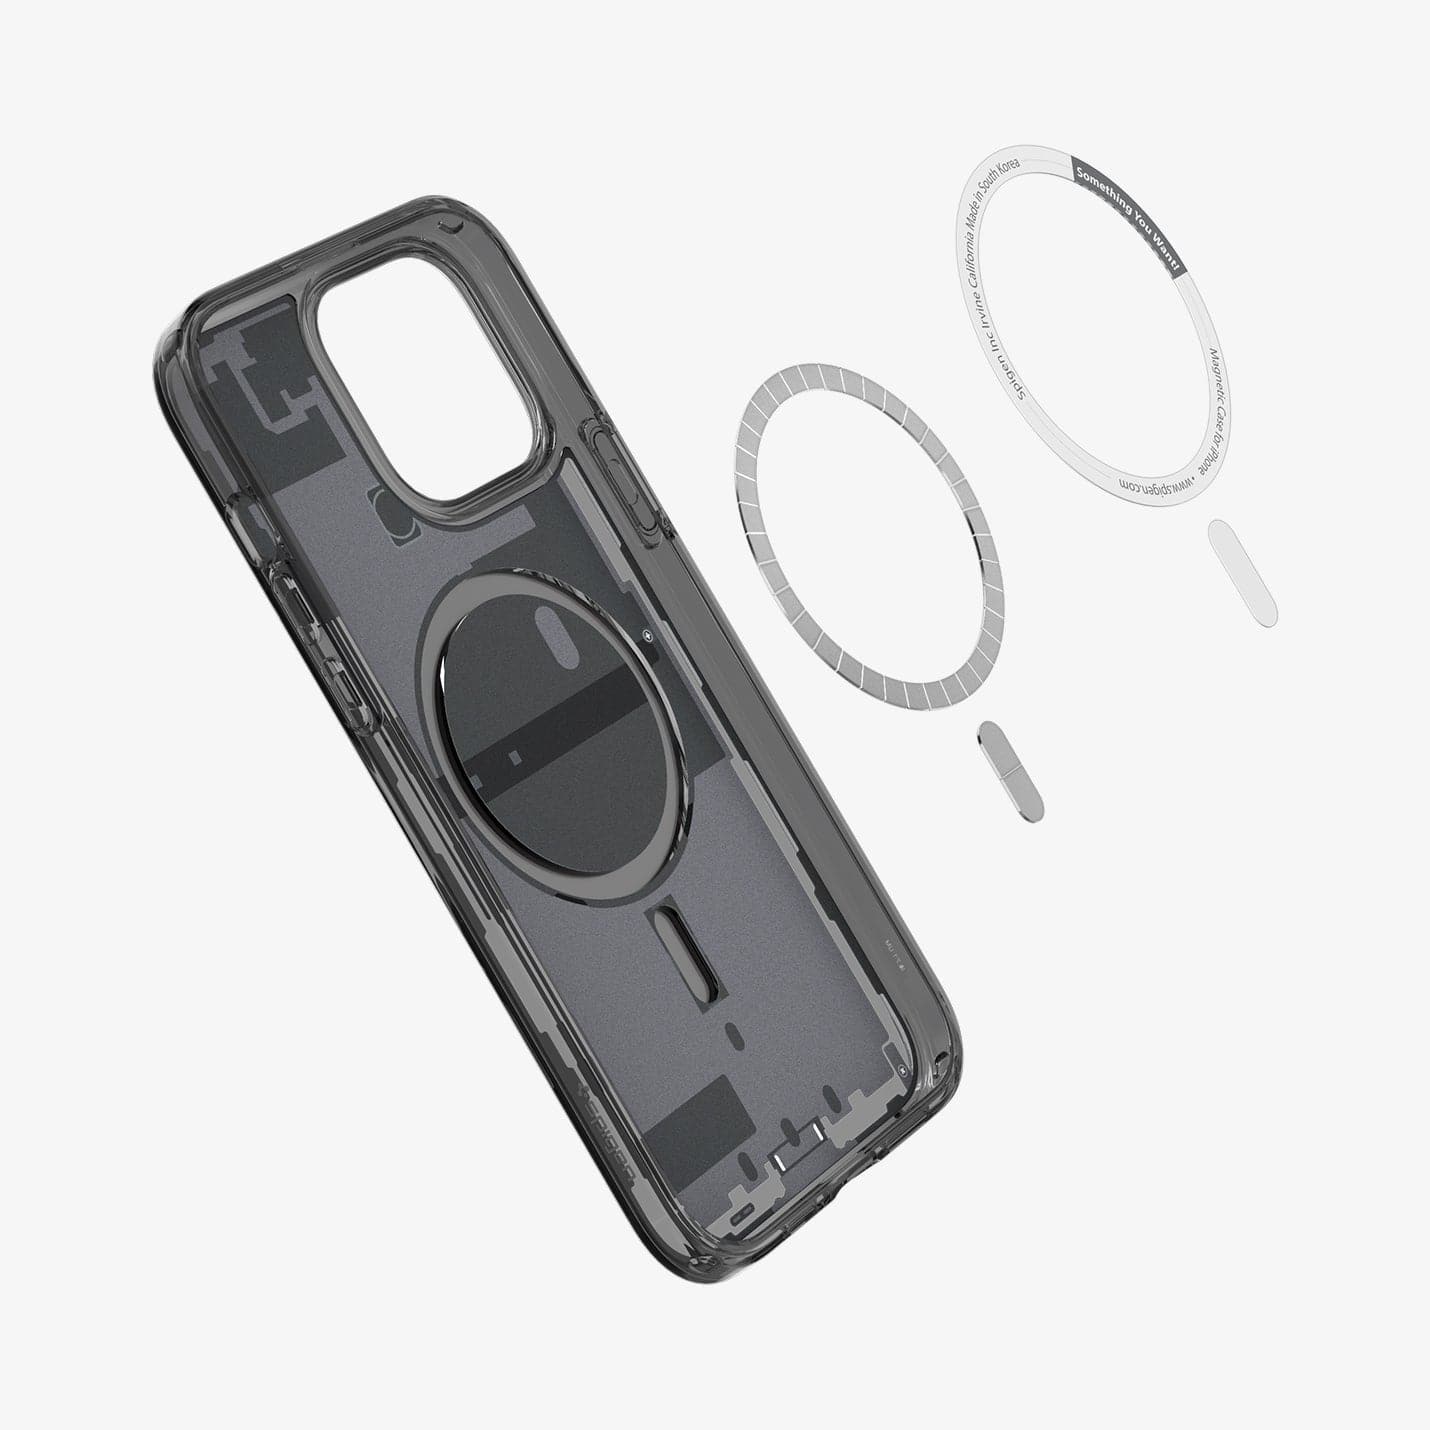 Spigen iPhone 13 Ultra Hybrid Mag case review - 9to5Toys